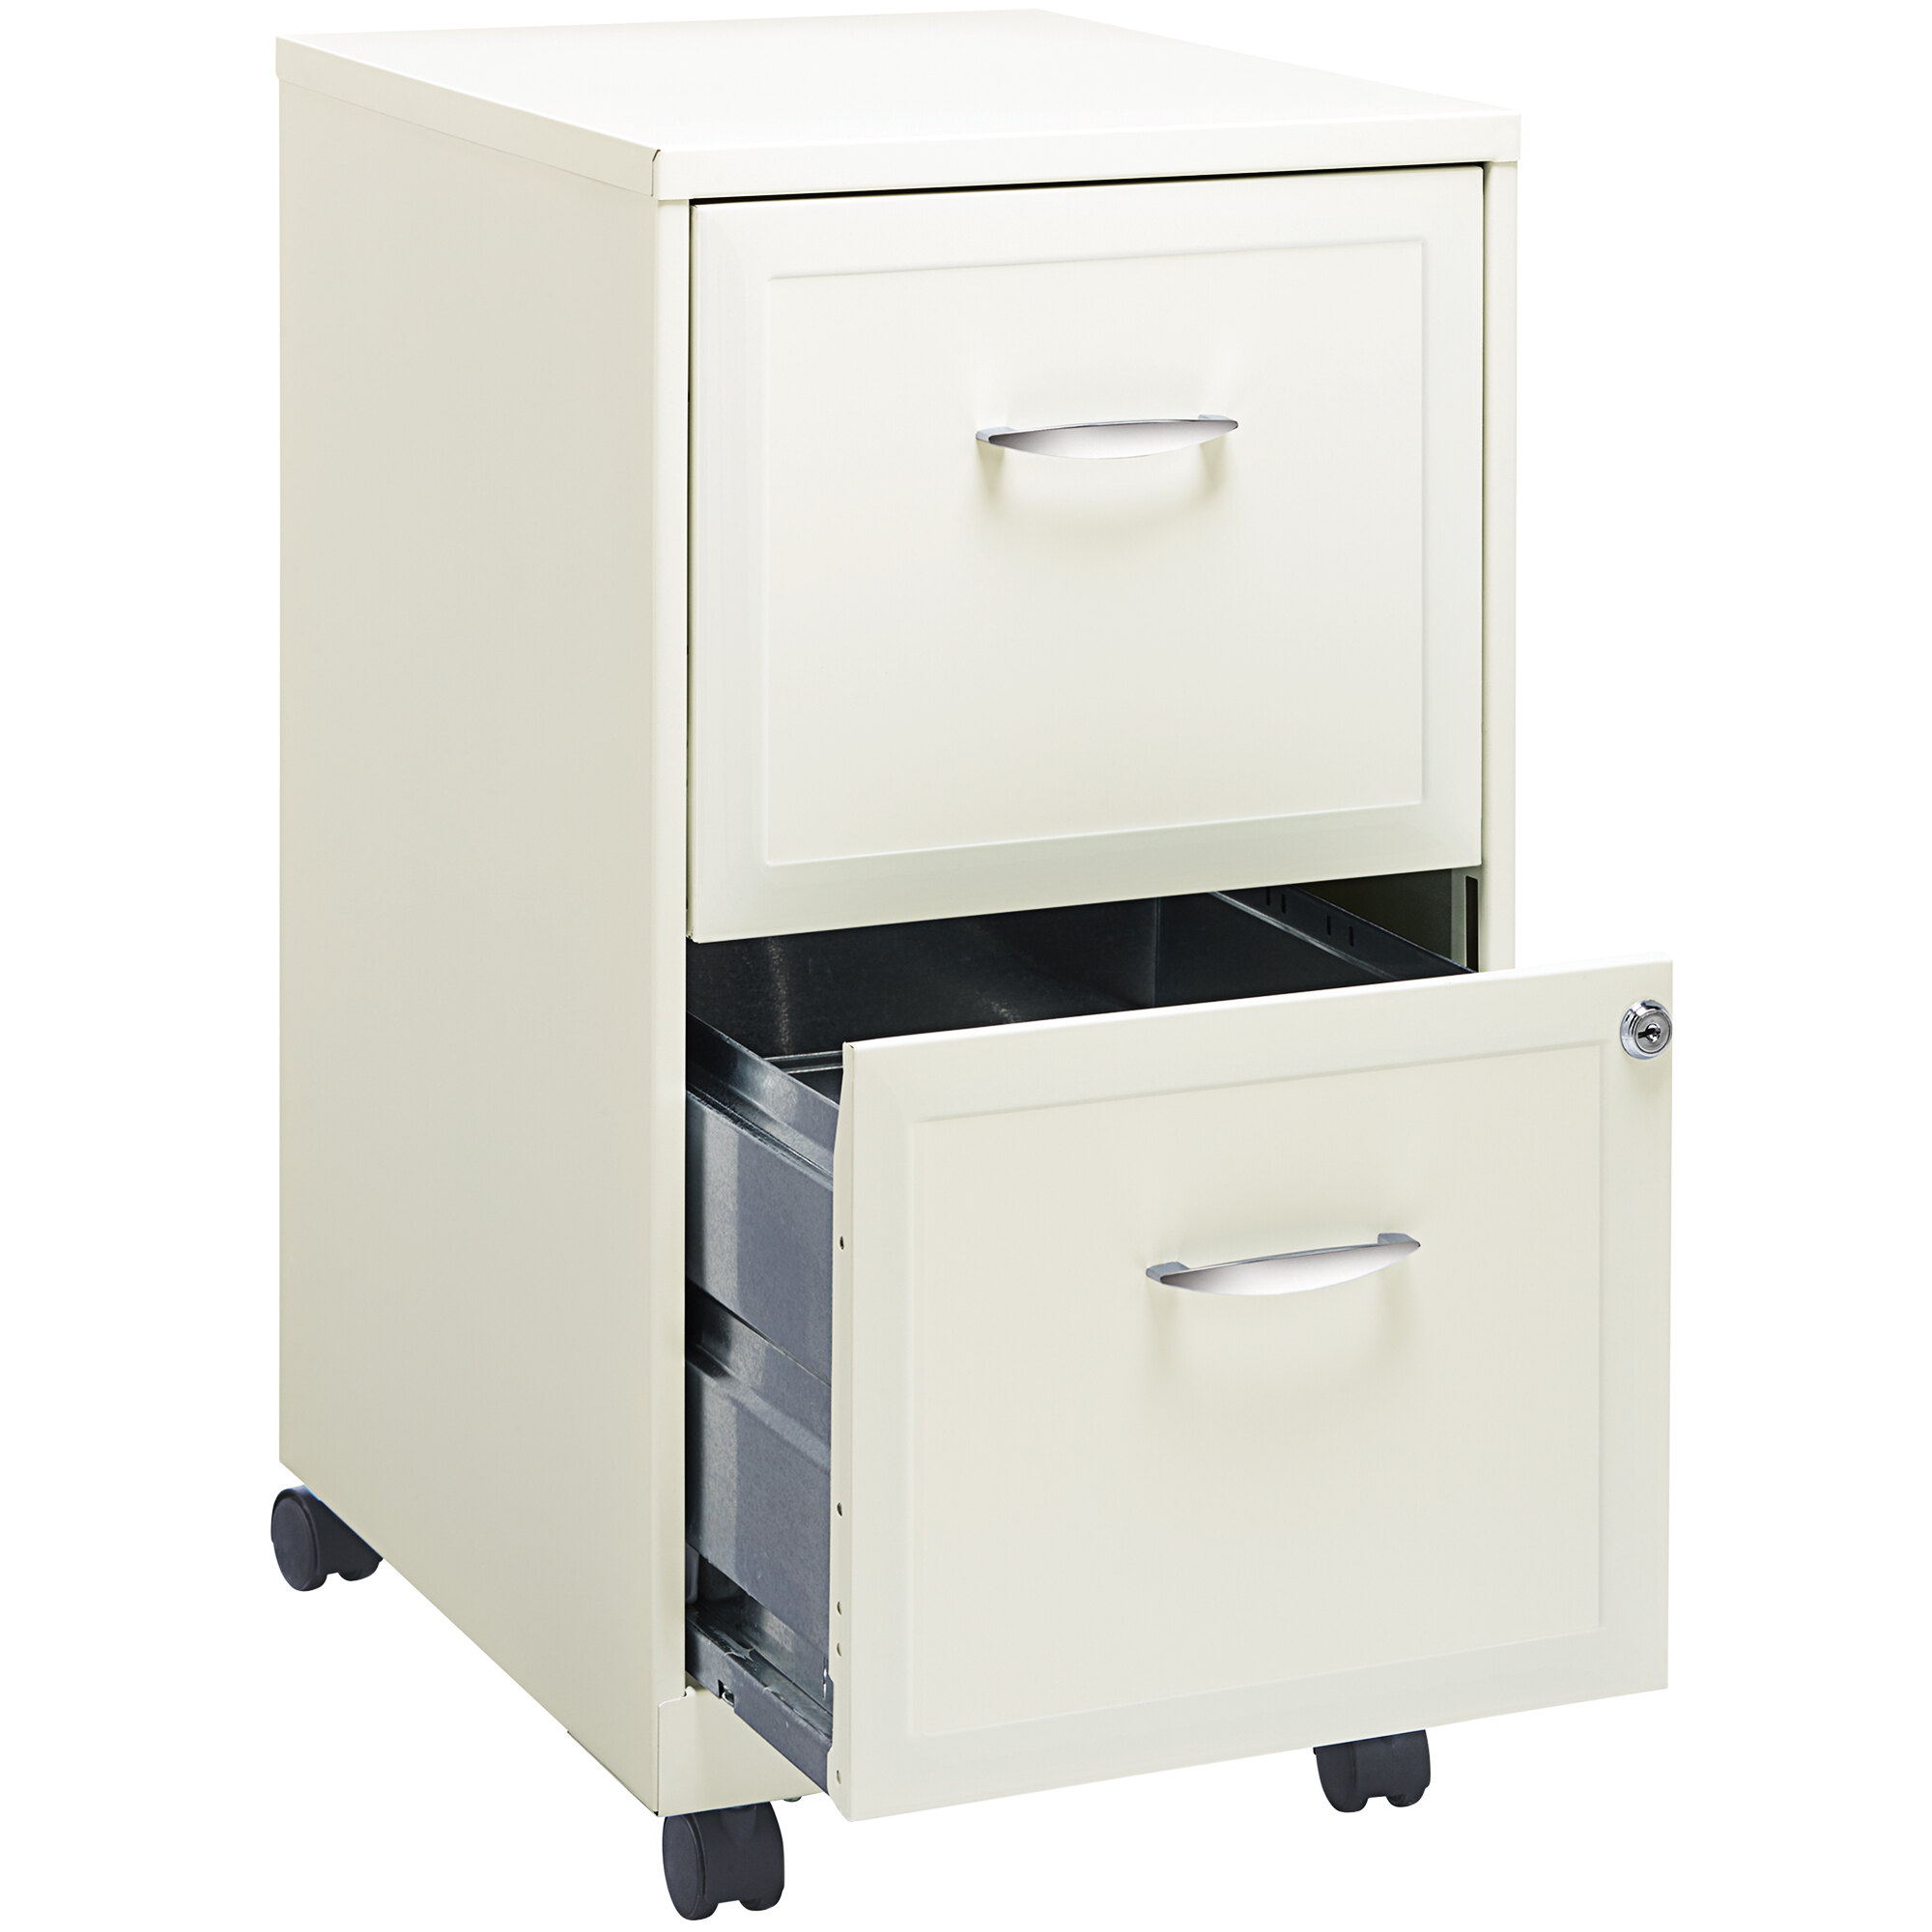 Hirsh Industries 19156 Space Solutions SOHO Pearl White